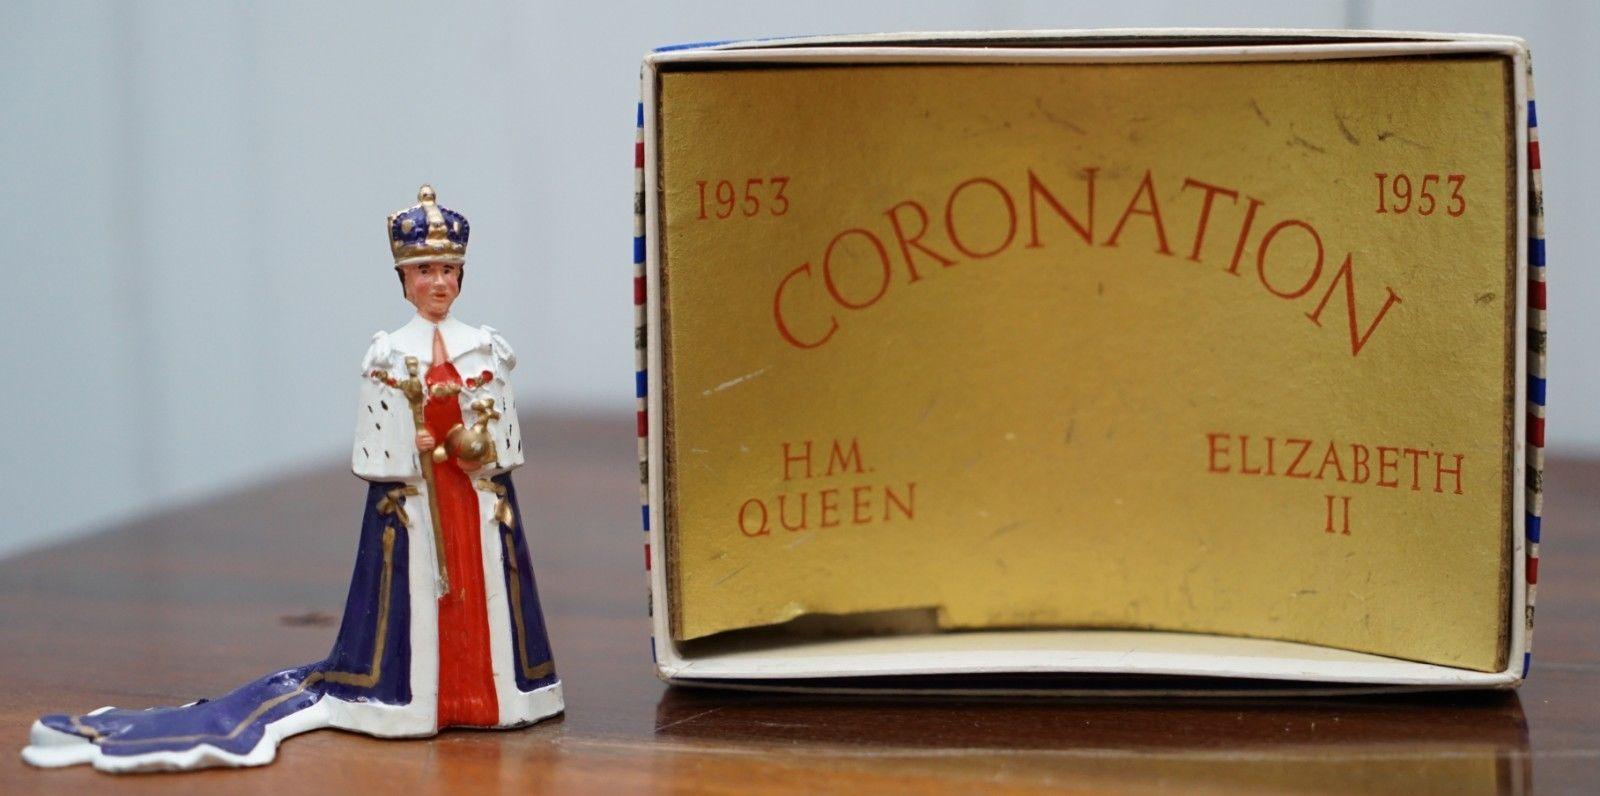 We are delighted to offer for sale this lovely rare boxed original souvenir of HM The Queen Elizabeth II on her coronation in 1953

The toy or model is in the original box which is original, it’s a fine example.

Box dimensions:

Height 9.5